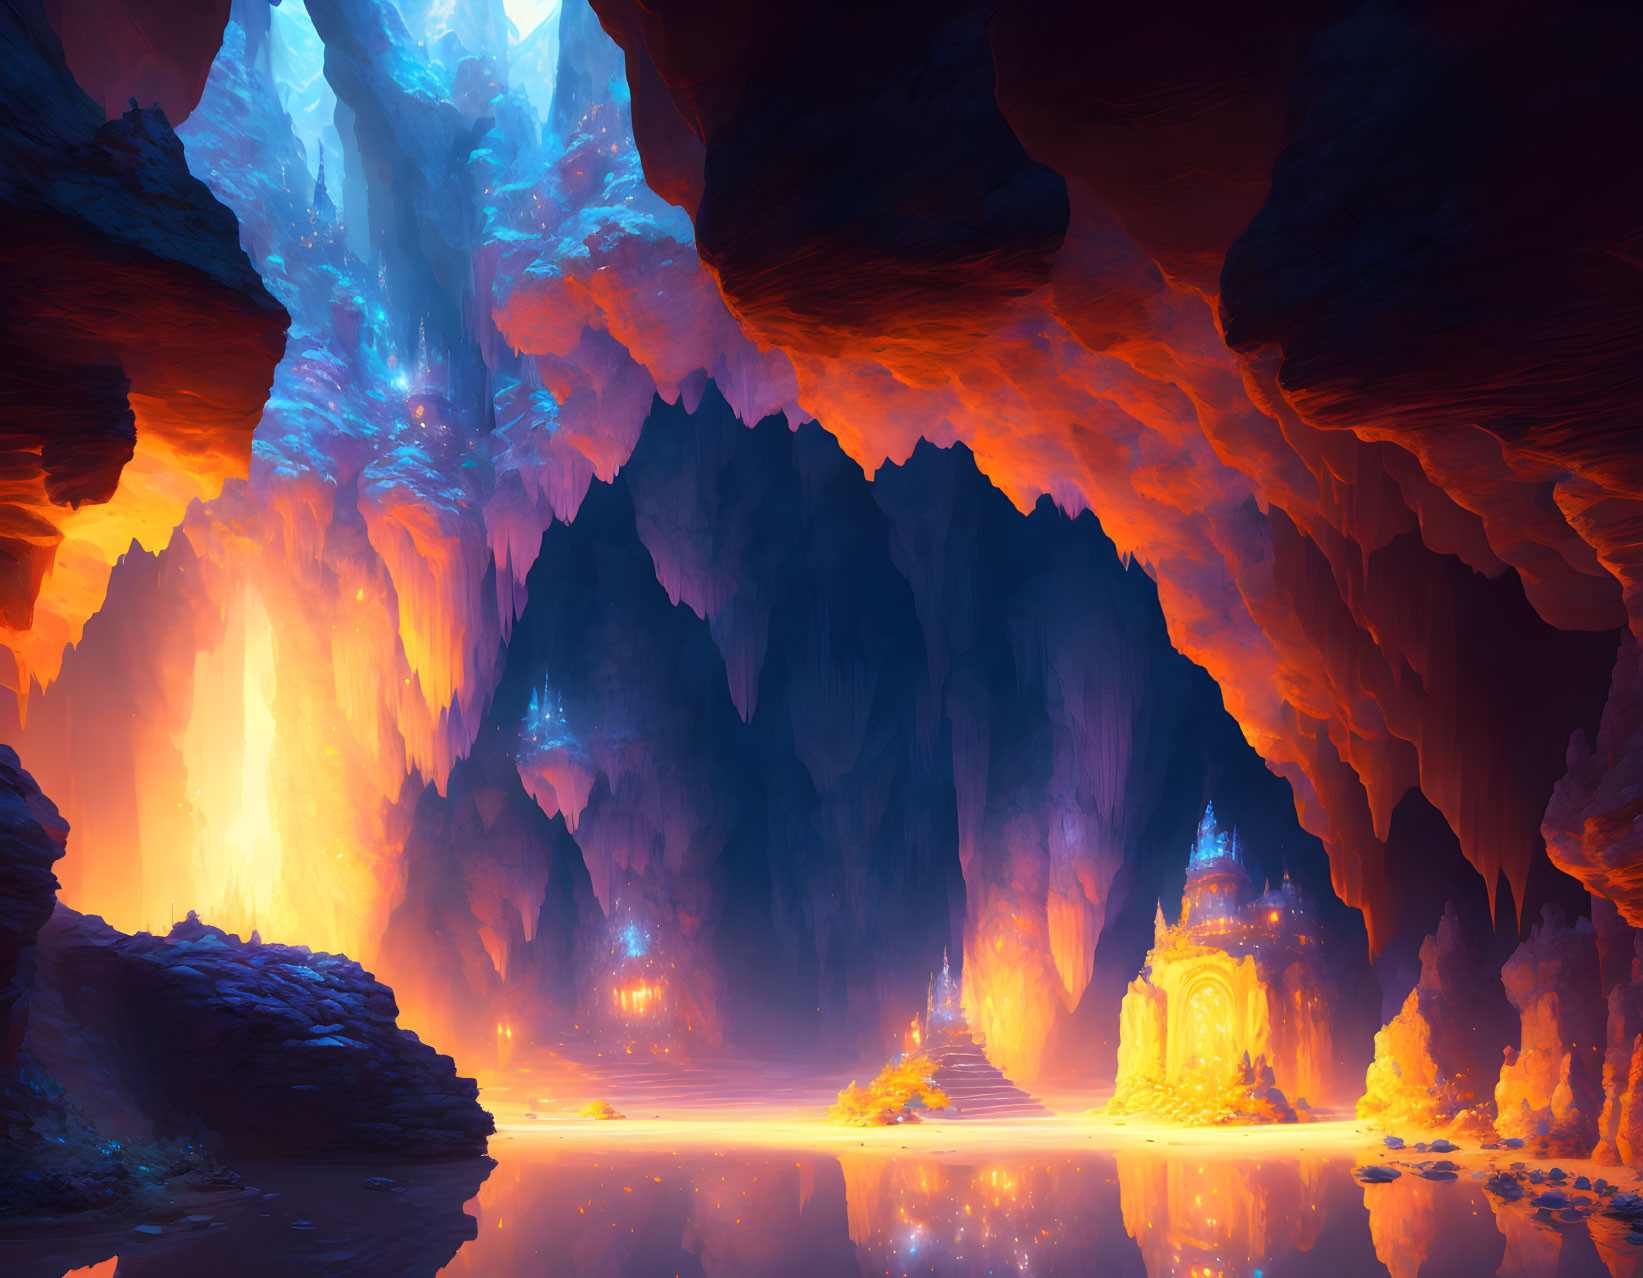 Fantastical cave with glowing lights, reflective water, and crystalline structures